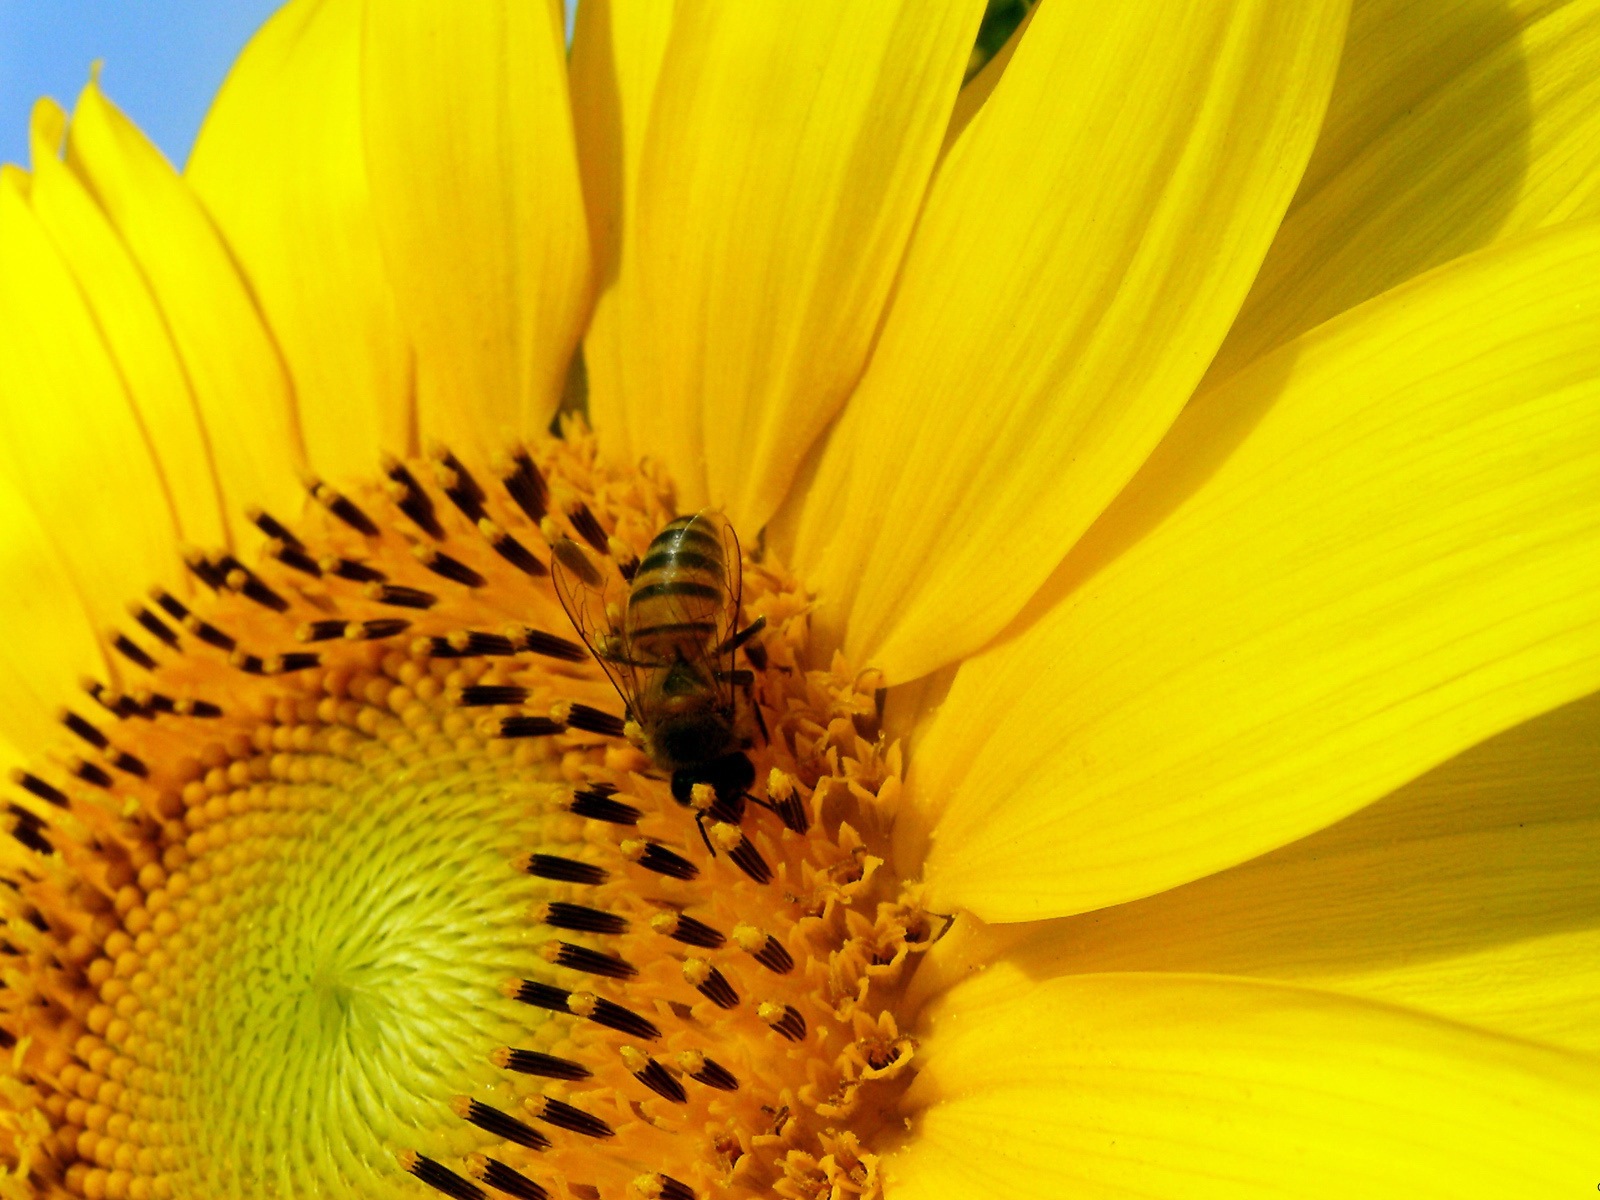 Windows 8 theme wallpaper, insects world #20 - 1600x1200